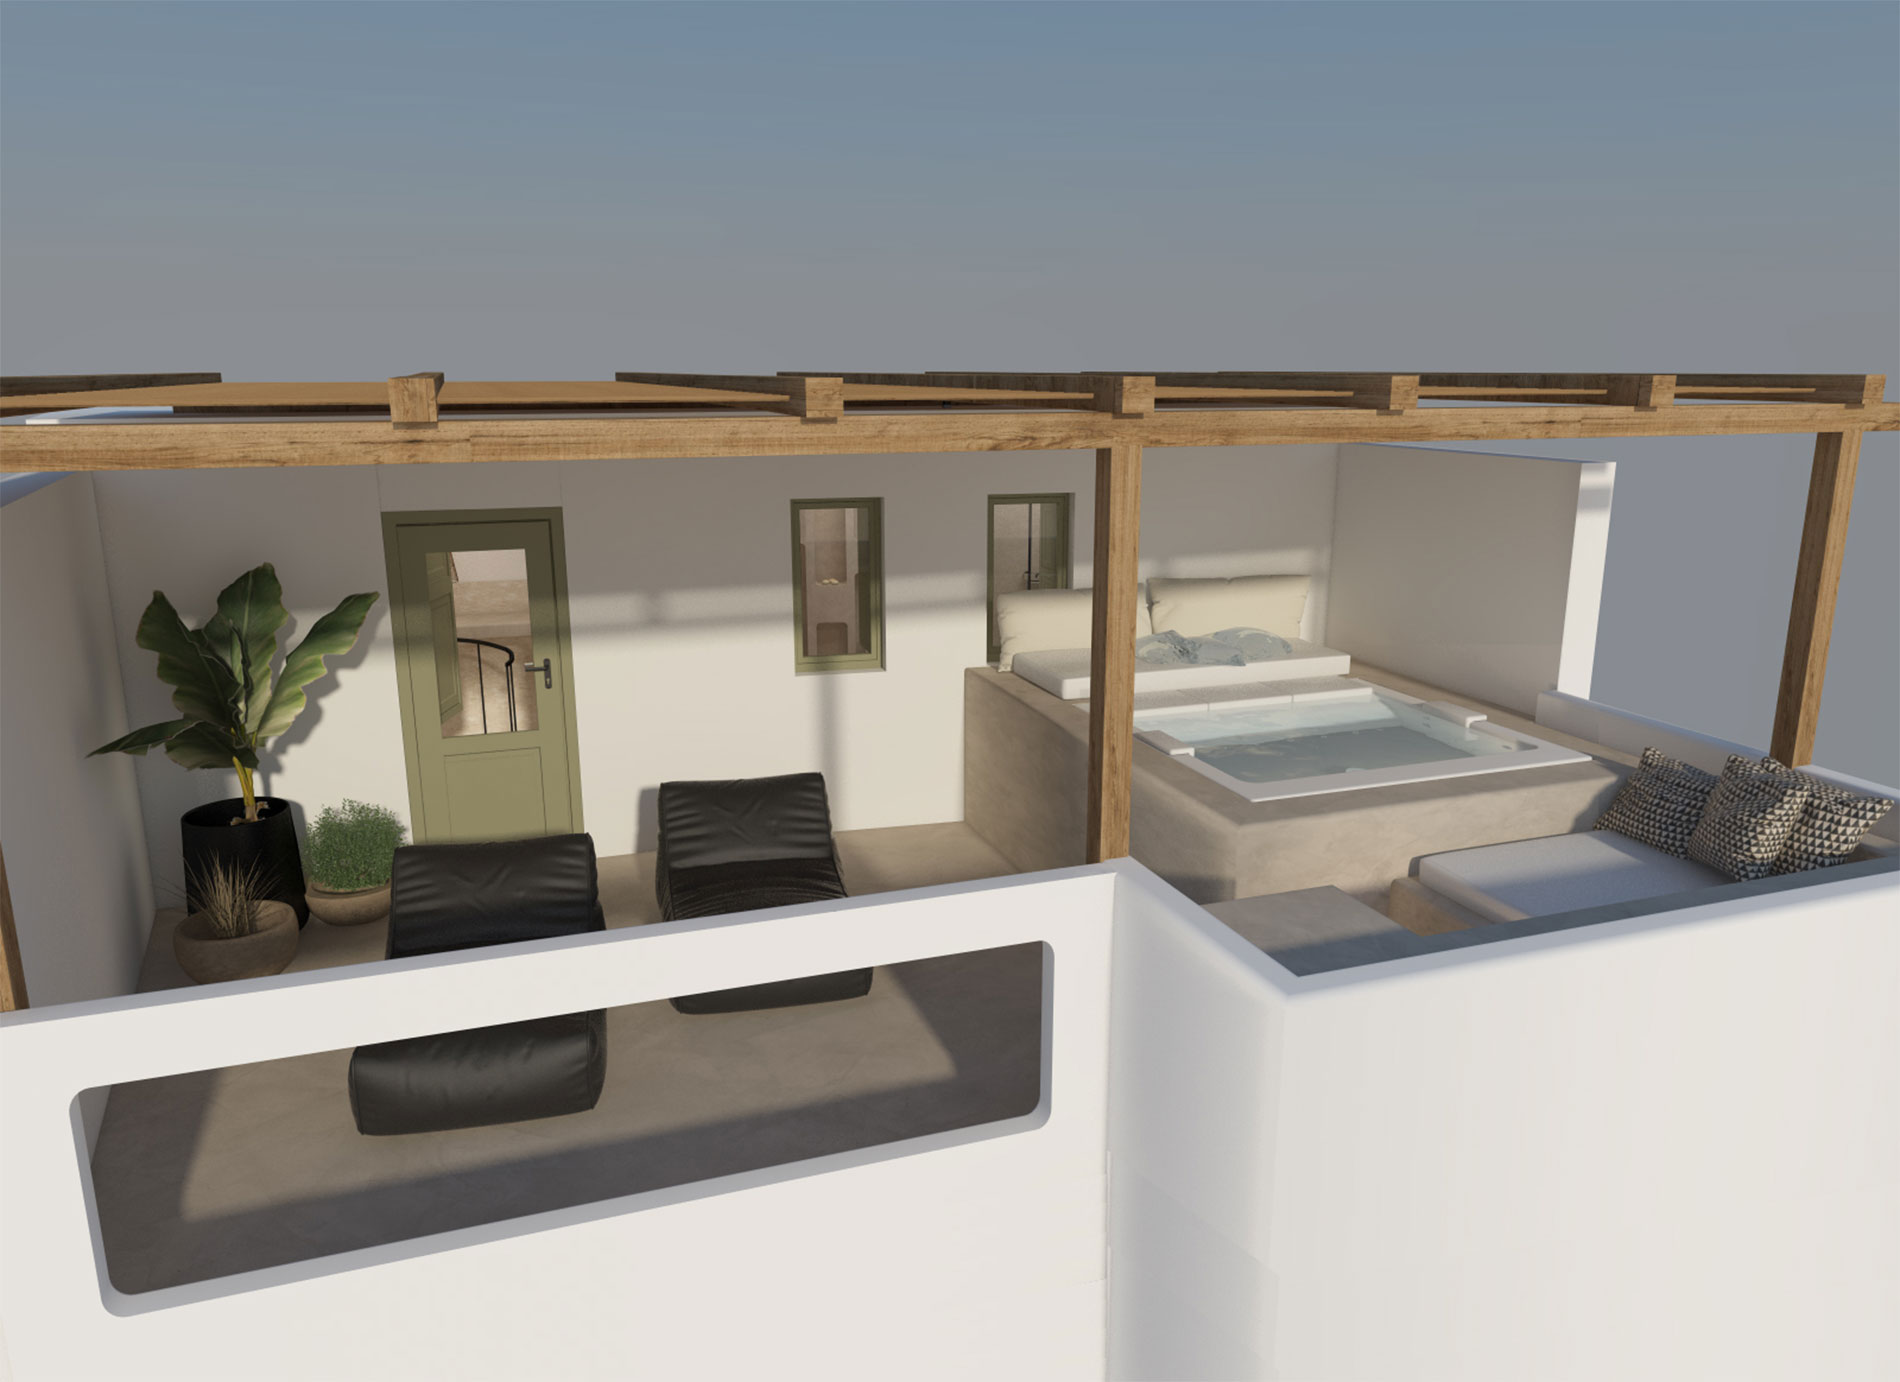 Aether Suite Canvas Suites Accommodation In Oia Santorini Island